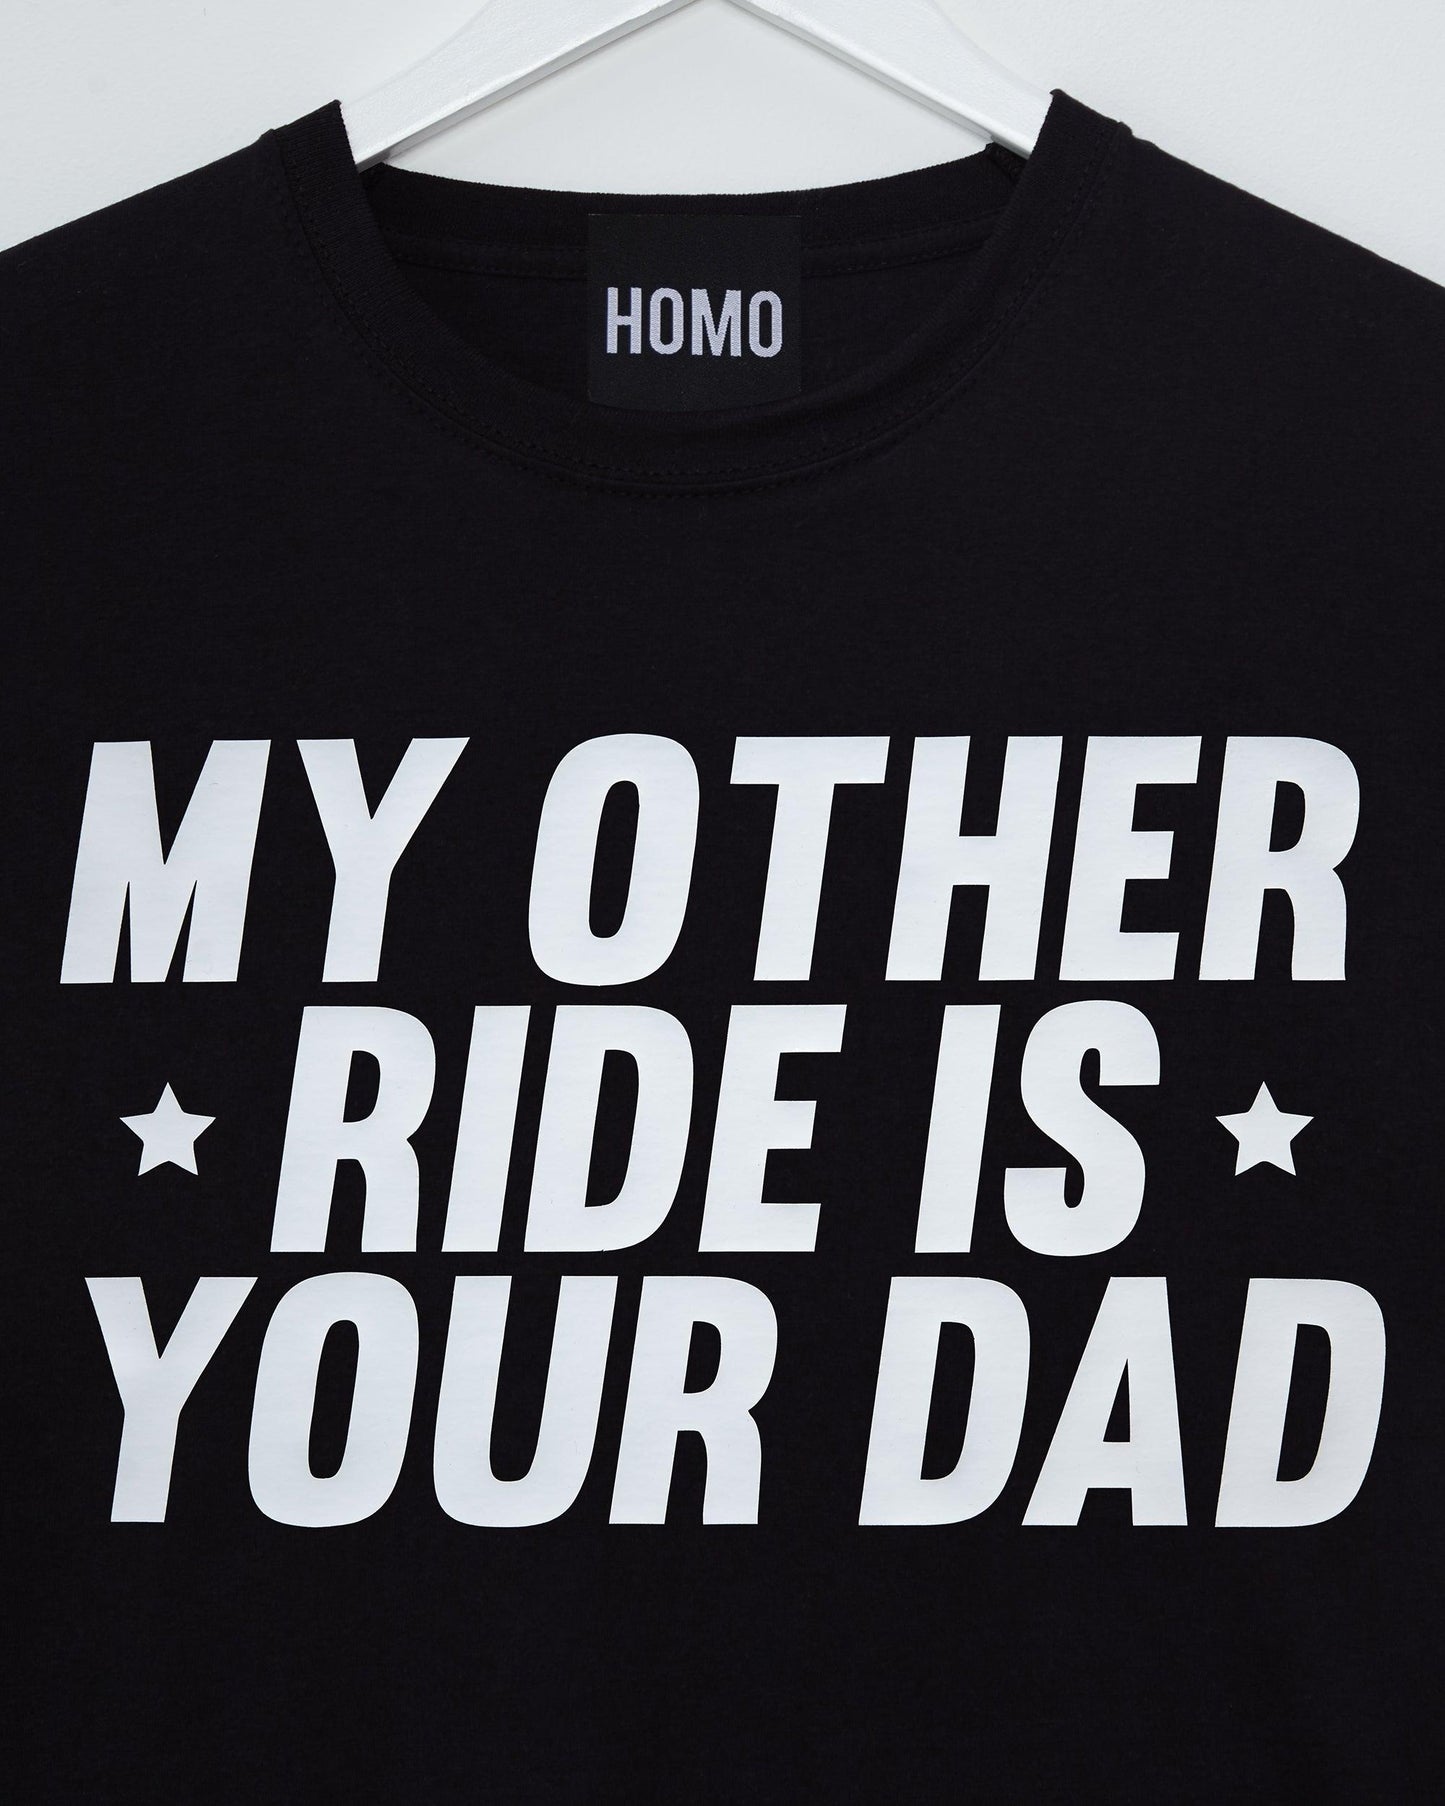 My other ride is your dad, glossy white on black - tee